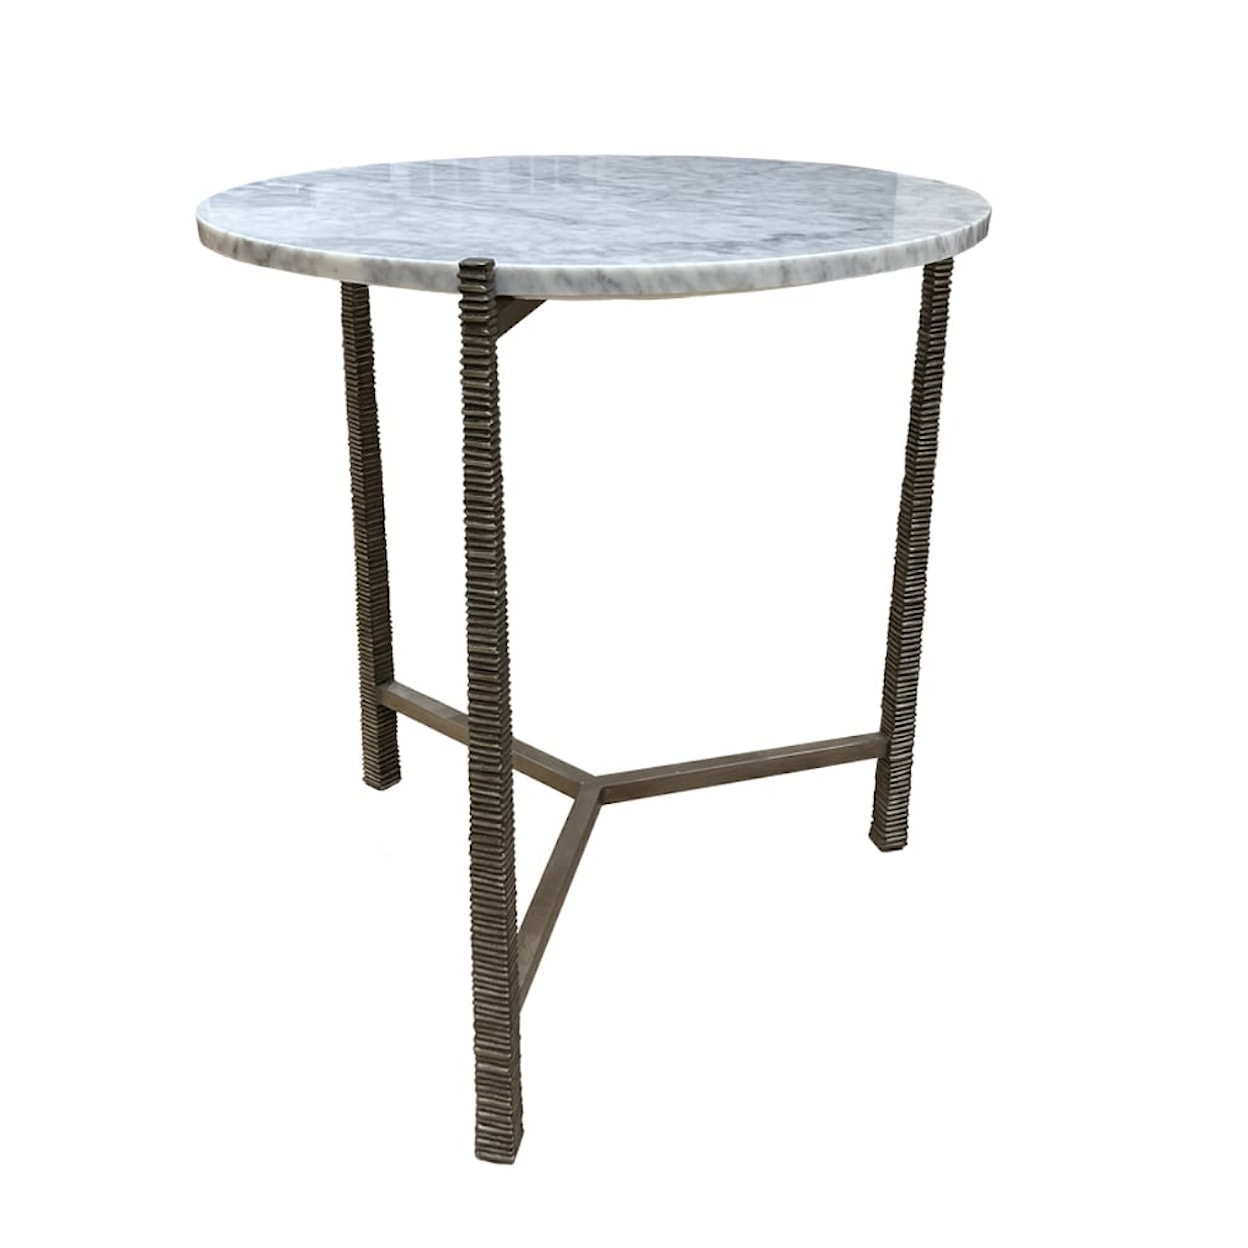 Oliver Home Furnishings End/ Side Tables ROUND SIDE TABLE W/ CARRARA MARBLE TOP